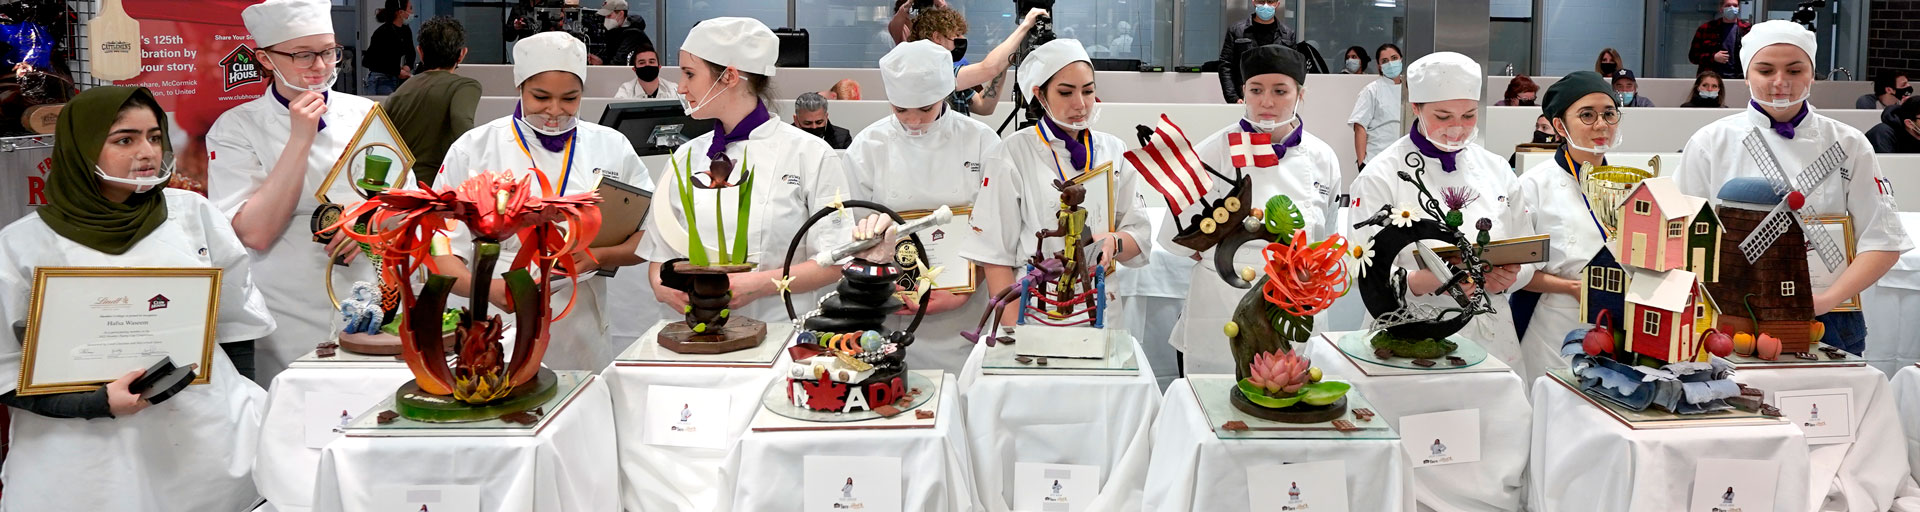 line up of pastry students with their creations at a competition